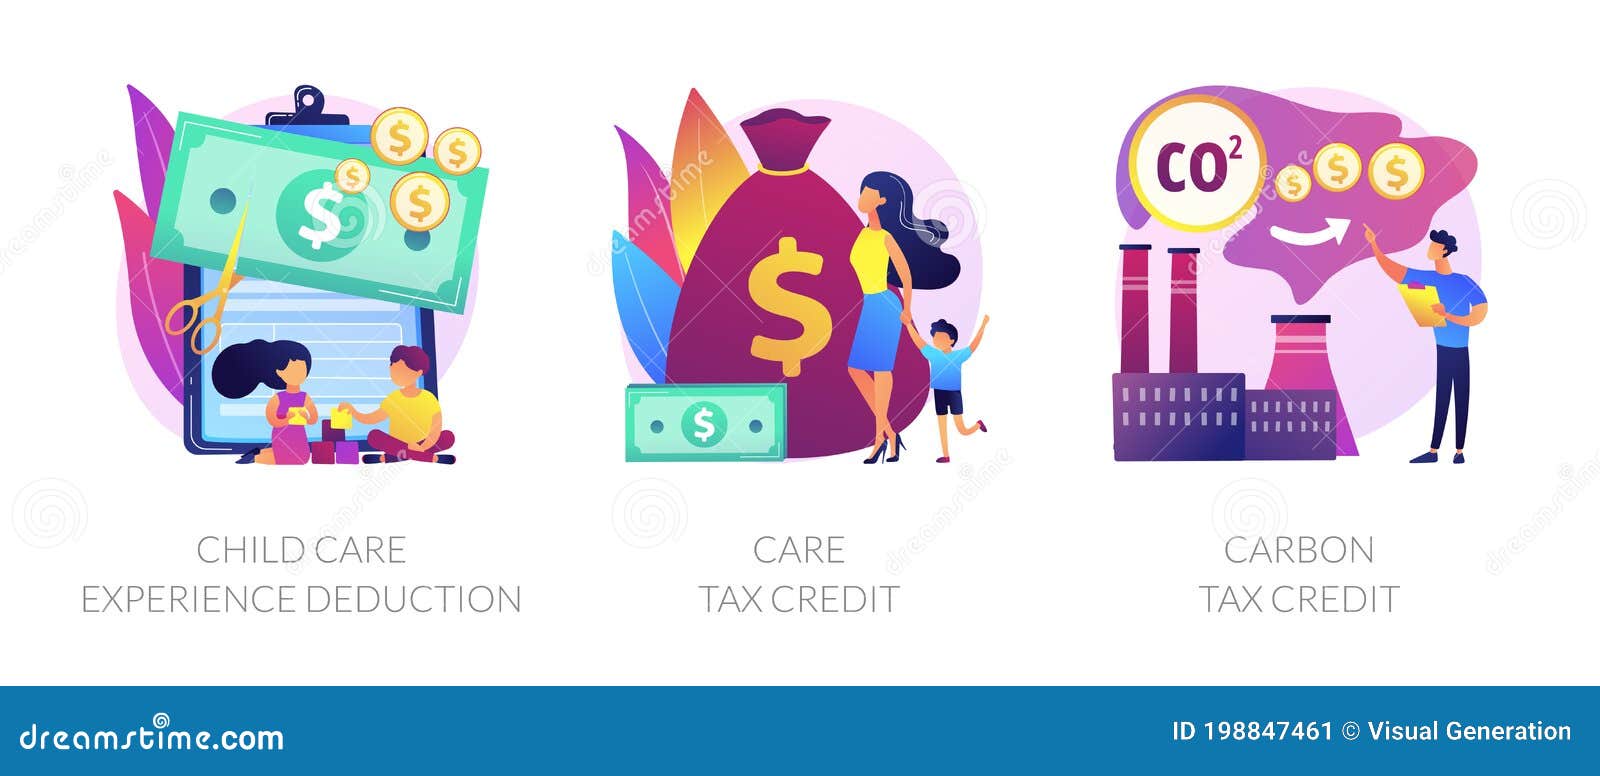 tax-deduction-exemption-and-credit-app-interface-template-cartoon